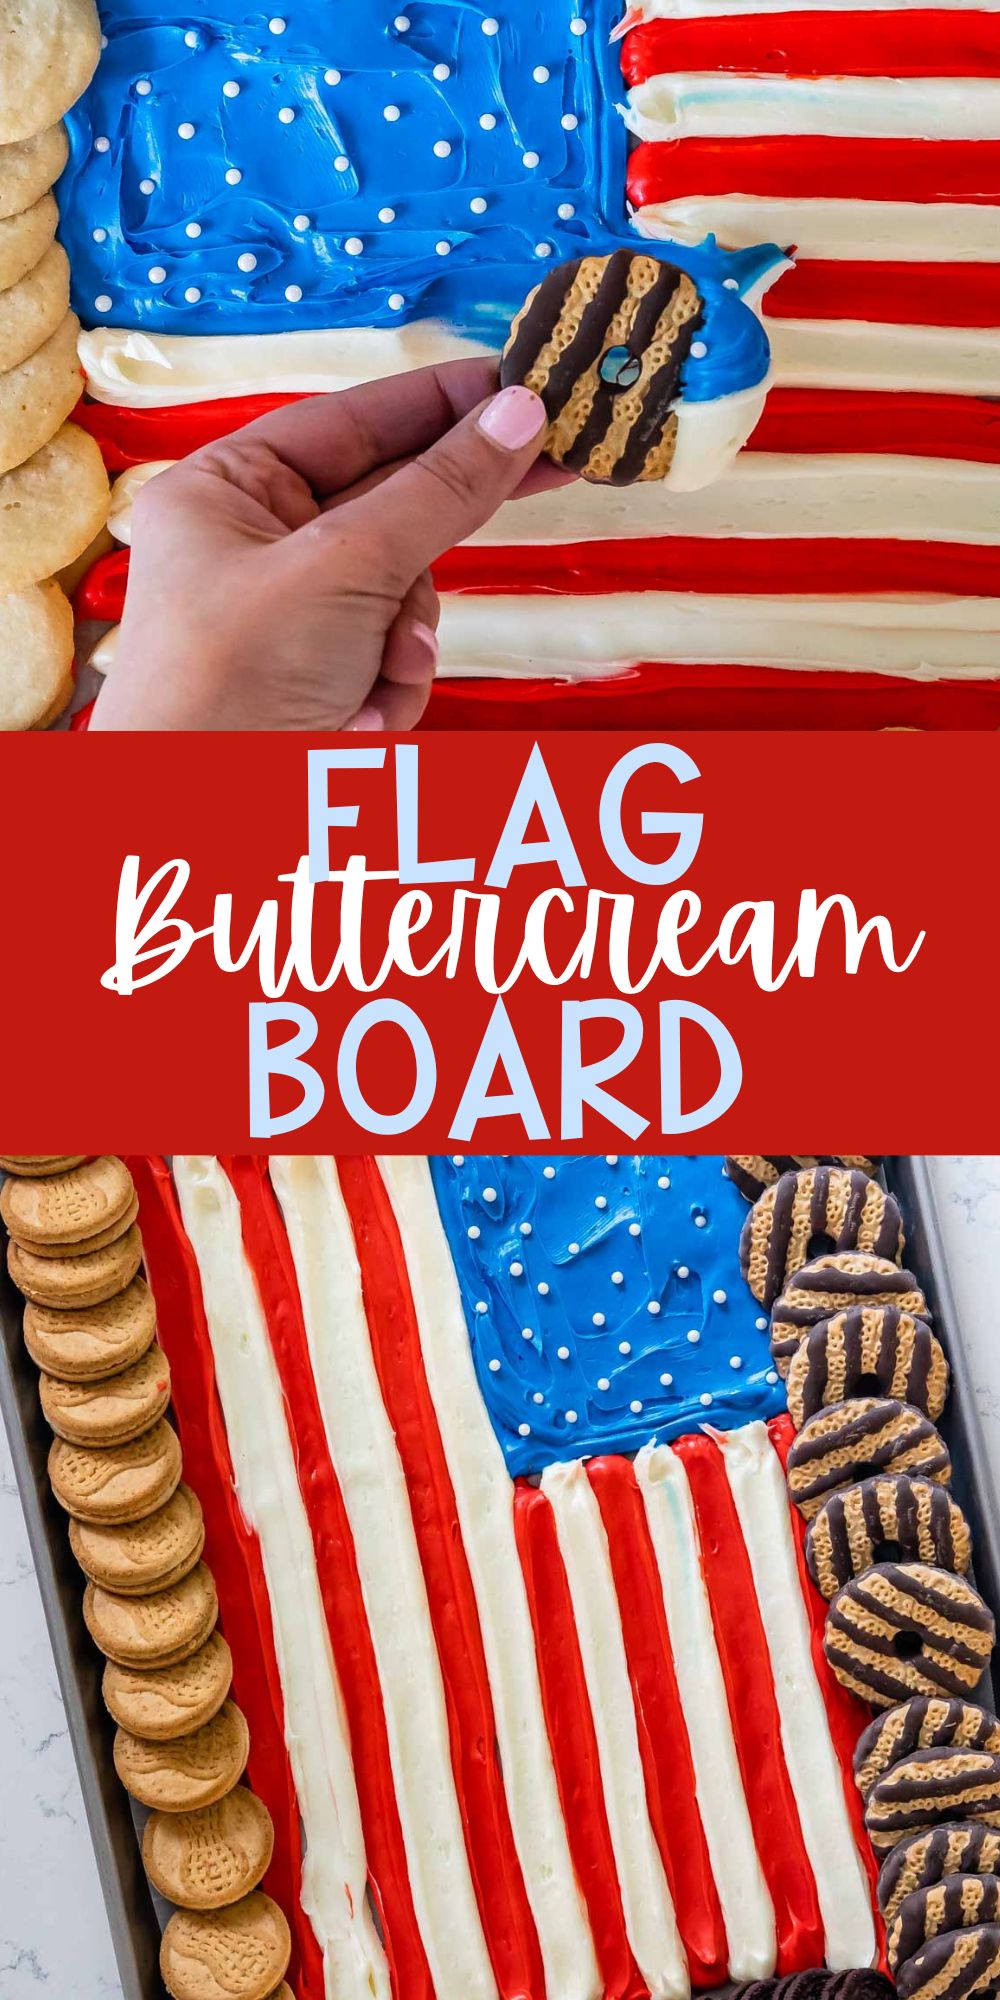 two photos of american flag made up out of frosting and surrounded by Girl Scout cookies with words on the image.